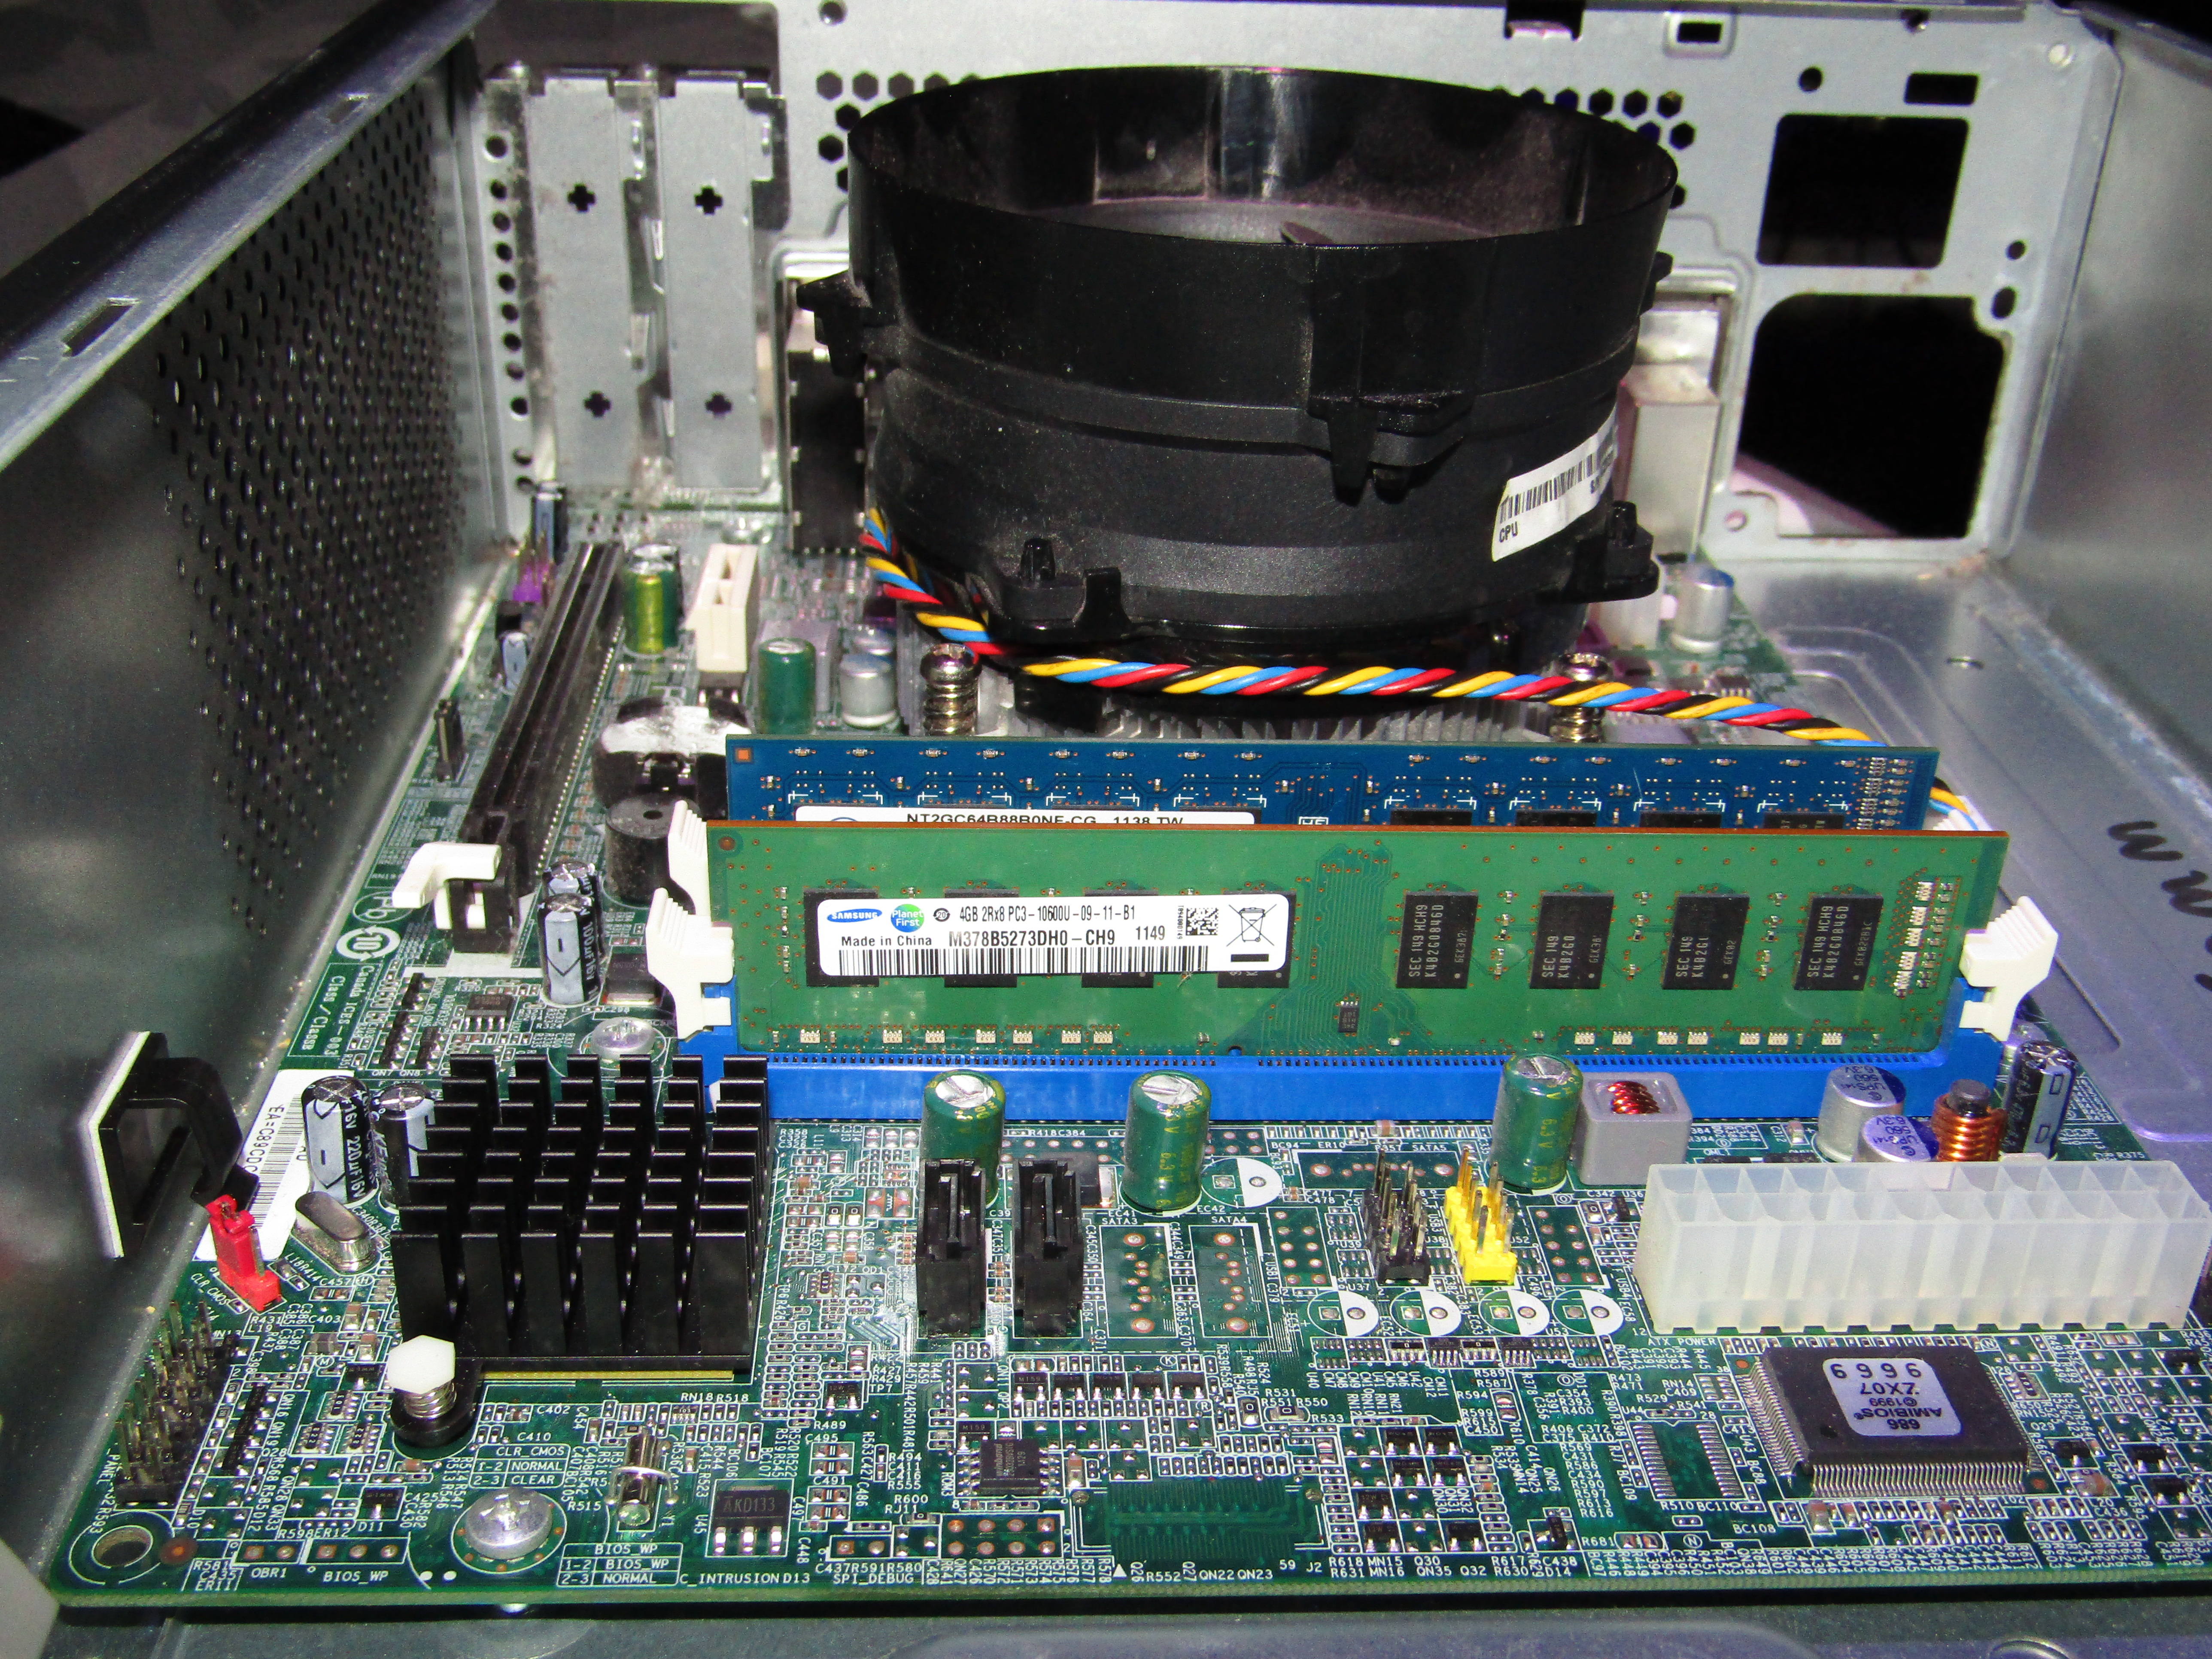 standard cases, non-standard motherboards - Cases and Power Supplies